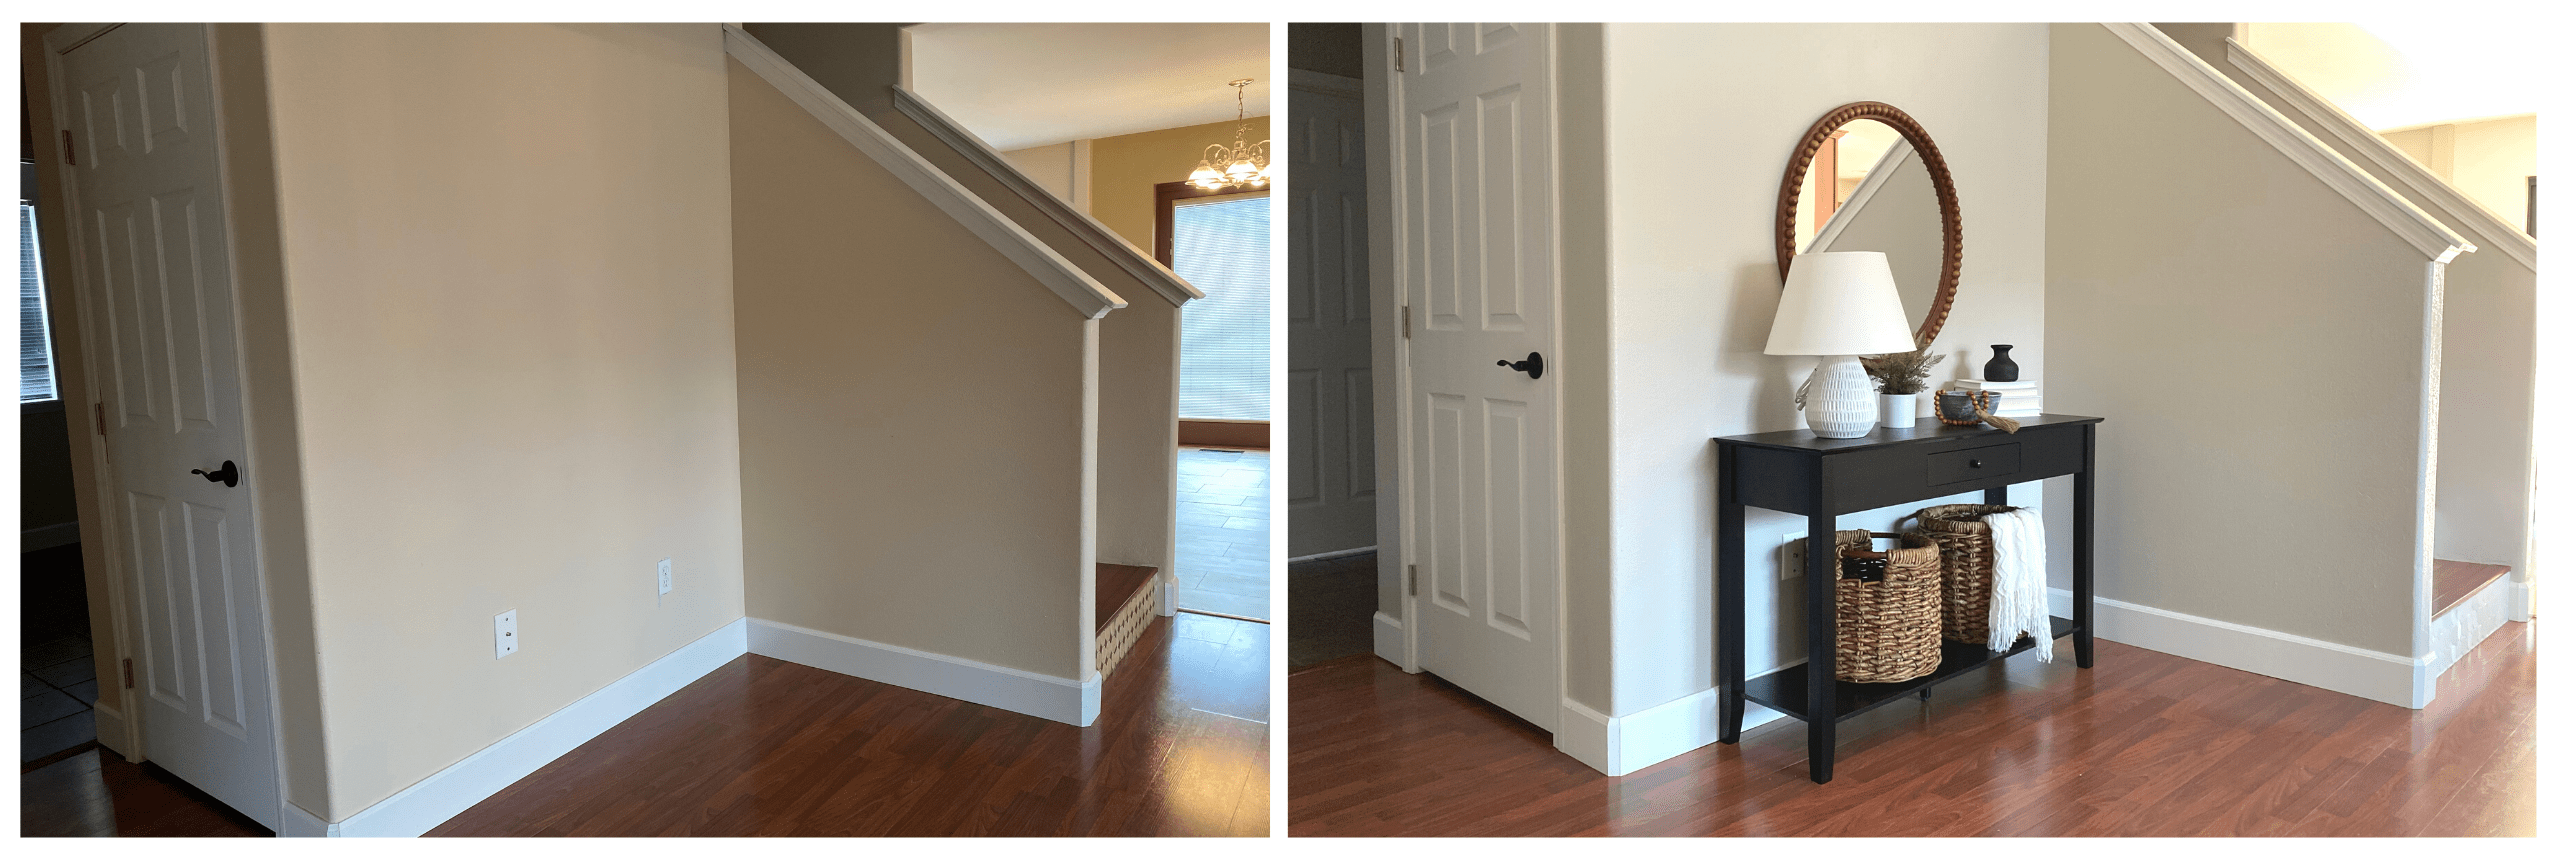 Hallway Before and After Home Staging